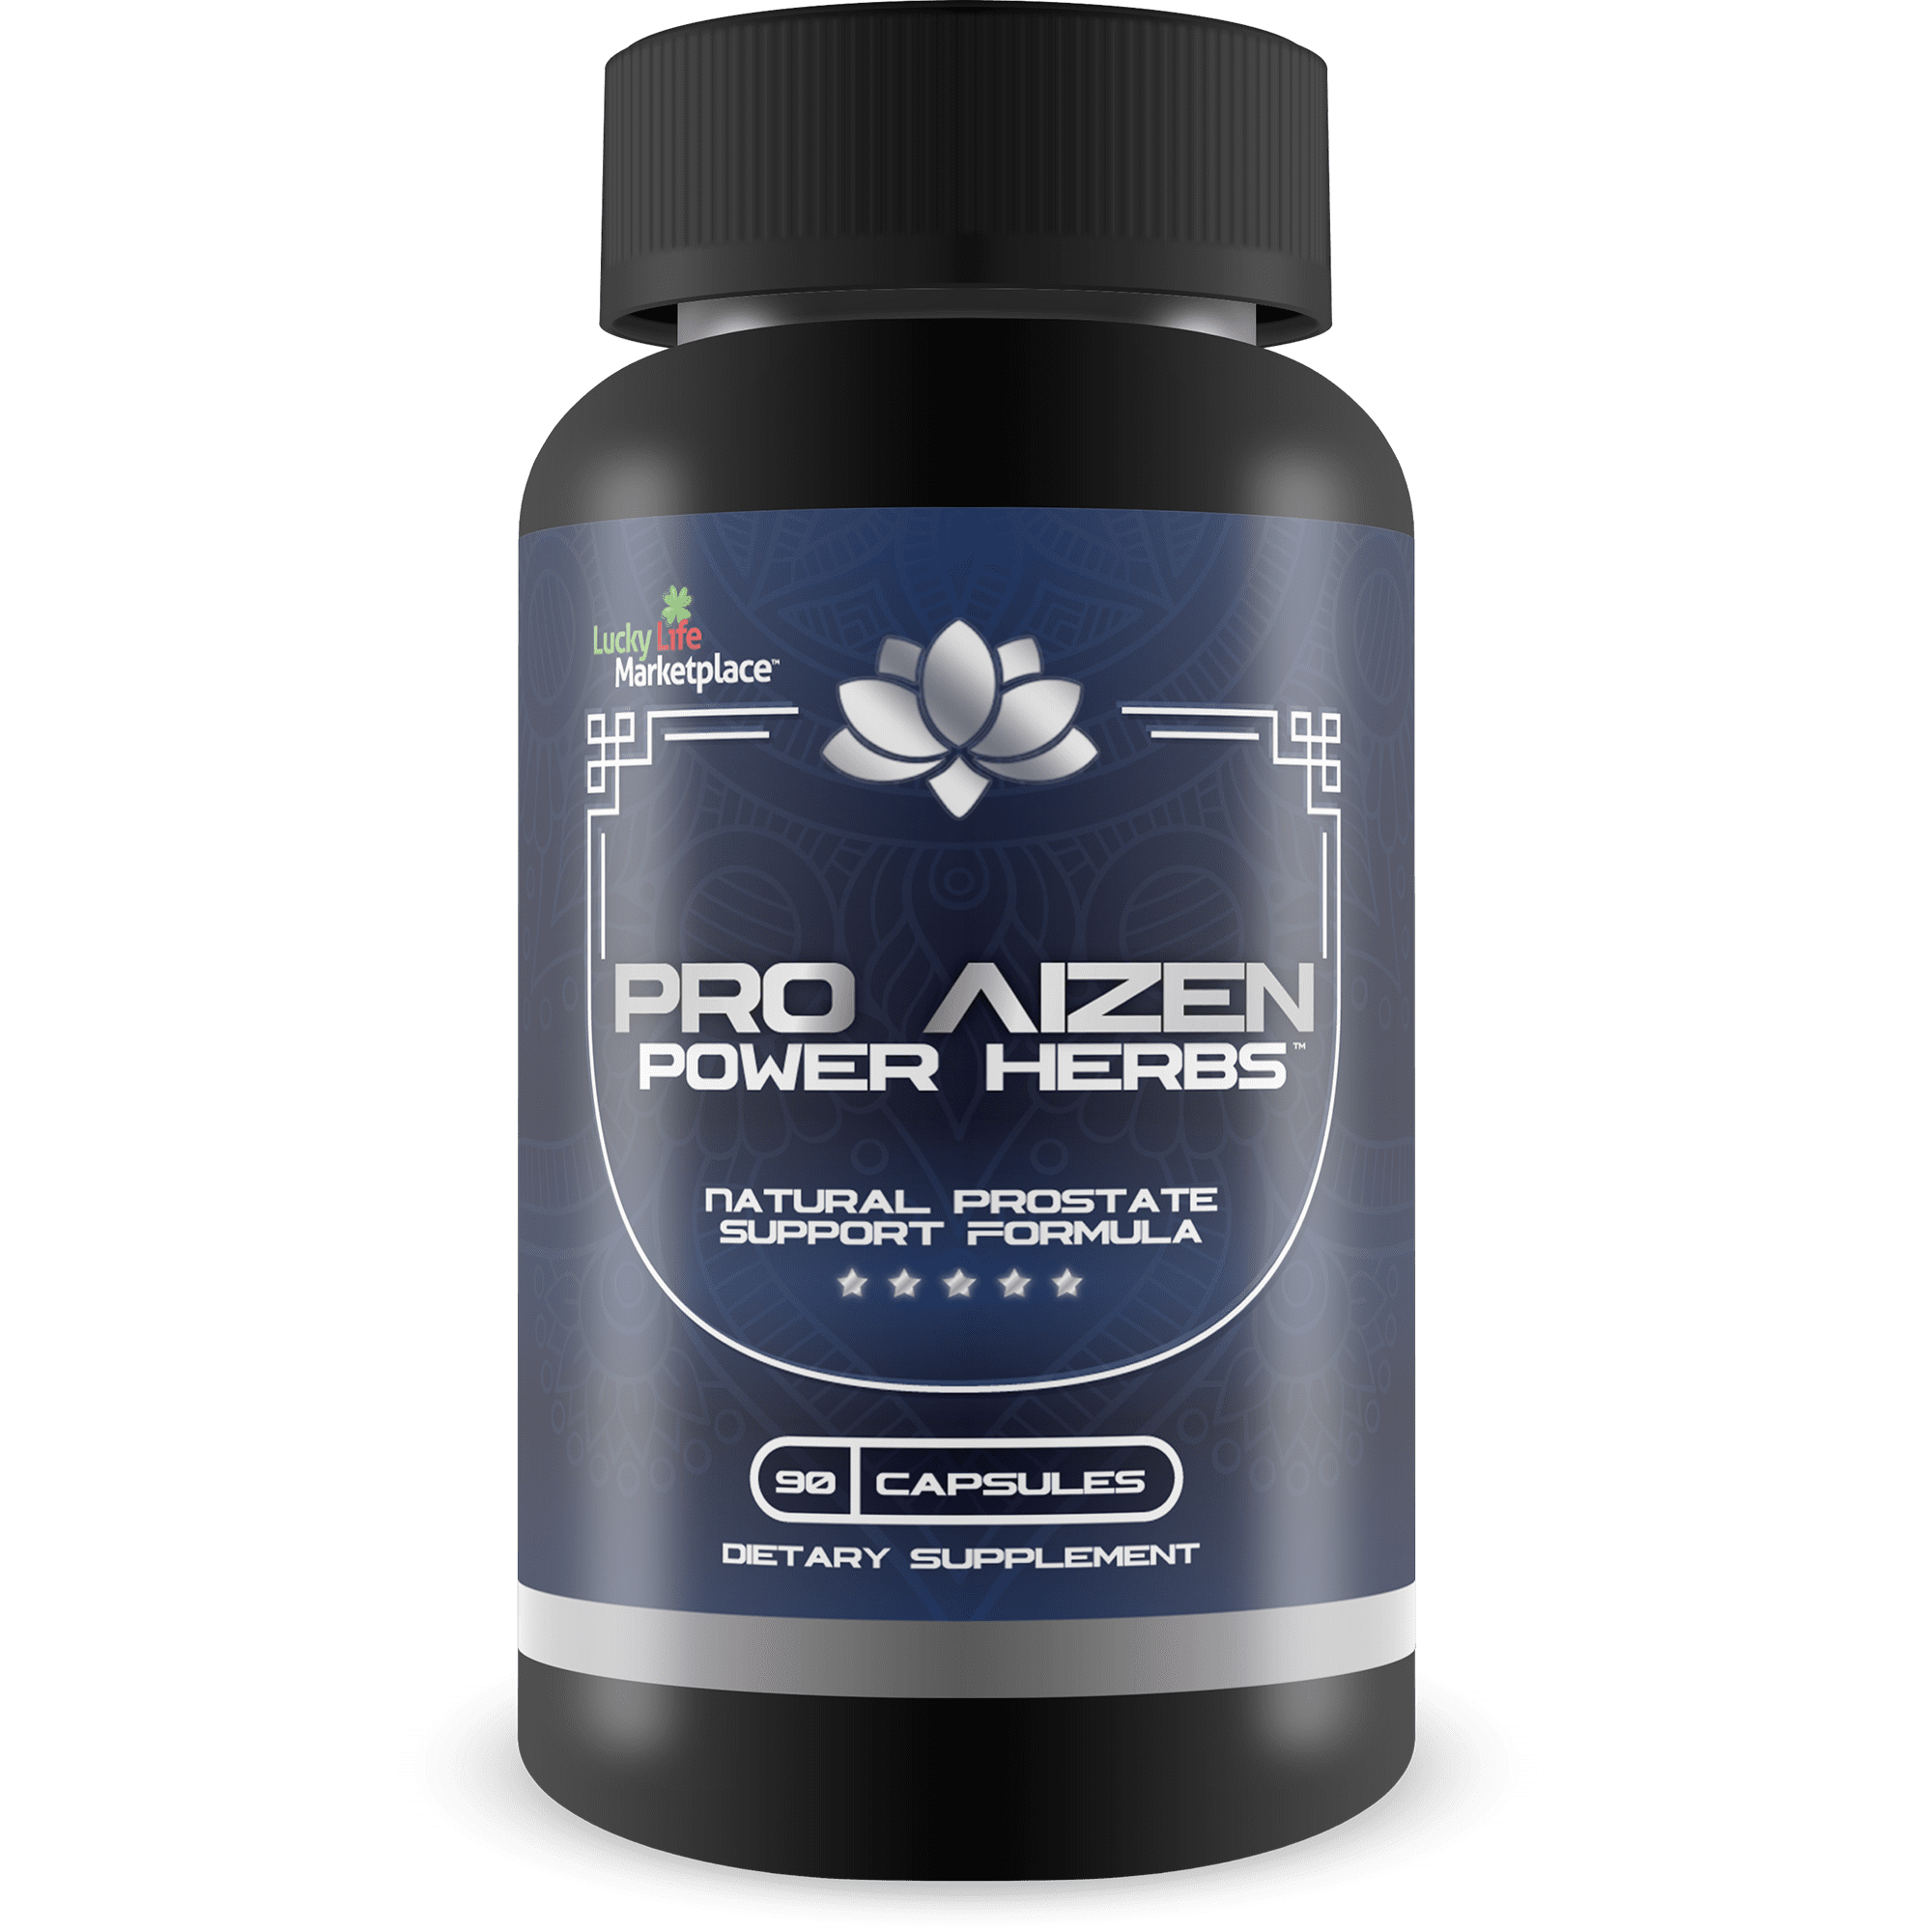 Pro Aizen Power Herbs - Male Prostate Support Supplement - Aid Healthy ...